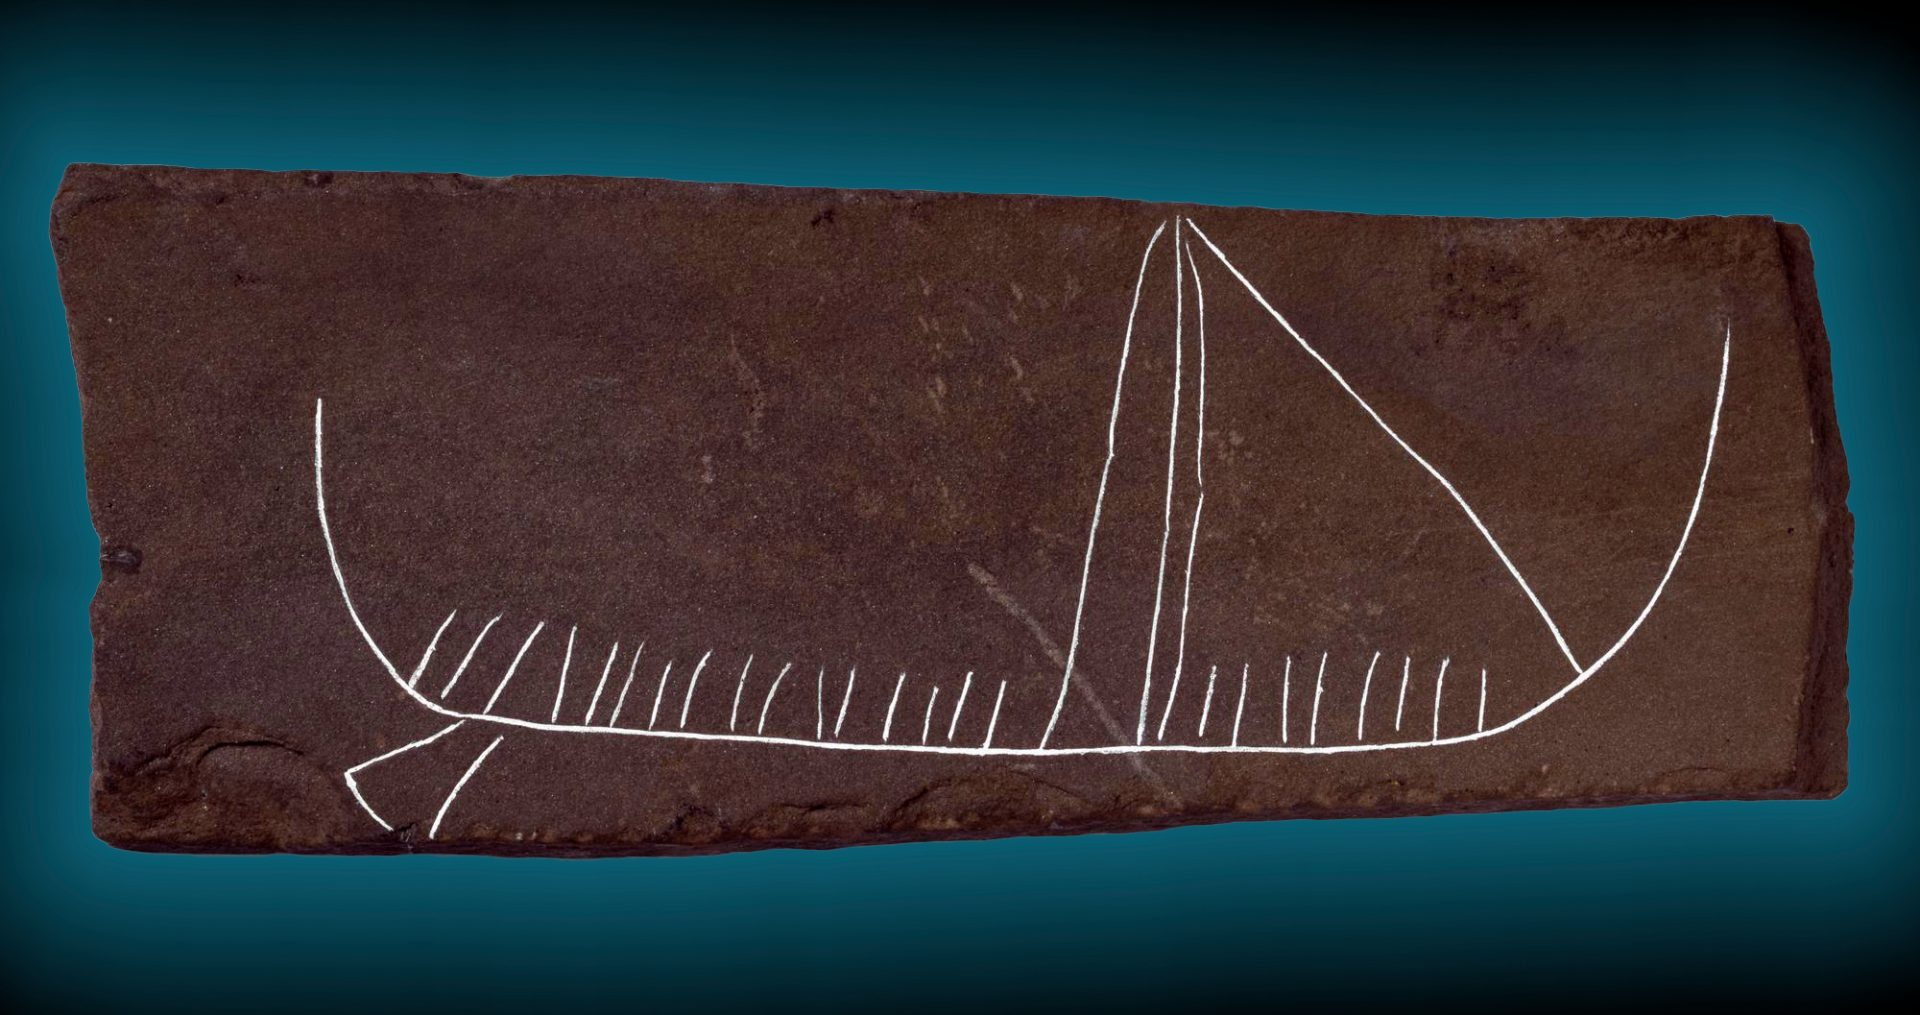 A detailed carving on slate depicting a Viking ship from the period 800 - 1100 AD, discovered in Jarlshof, Shetland, Scotland.